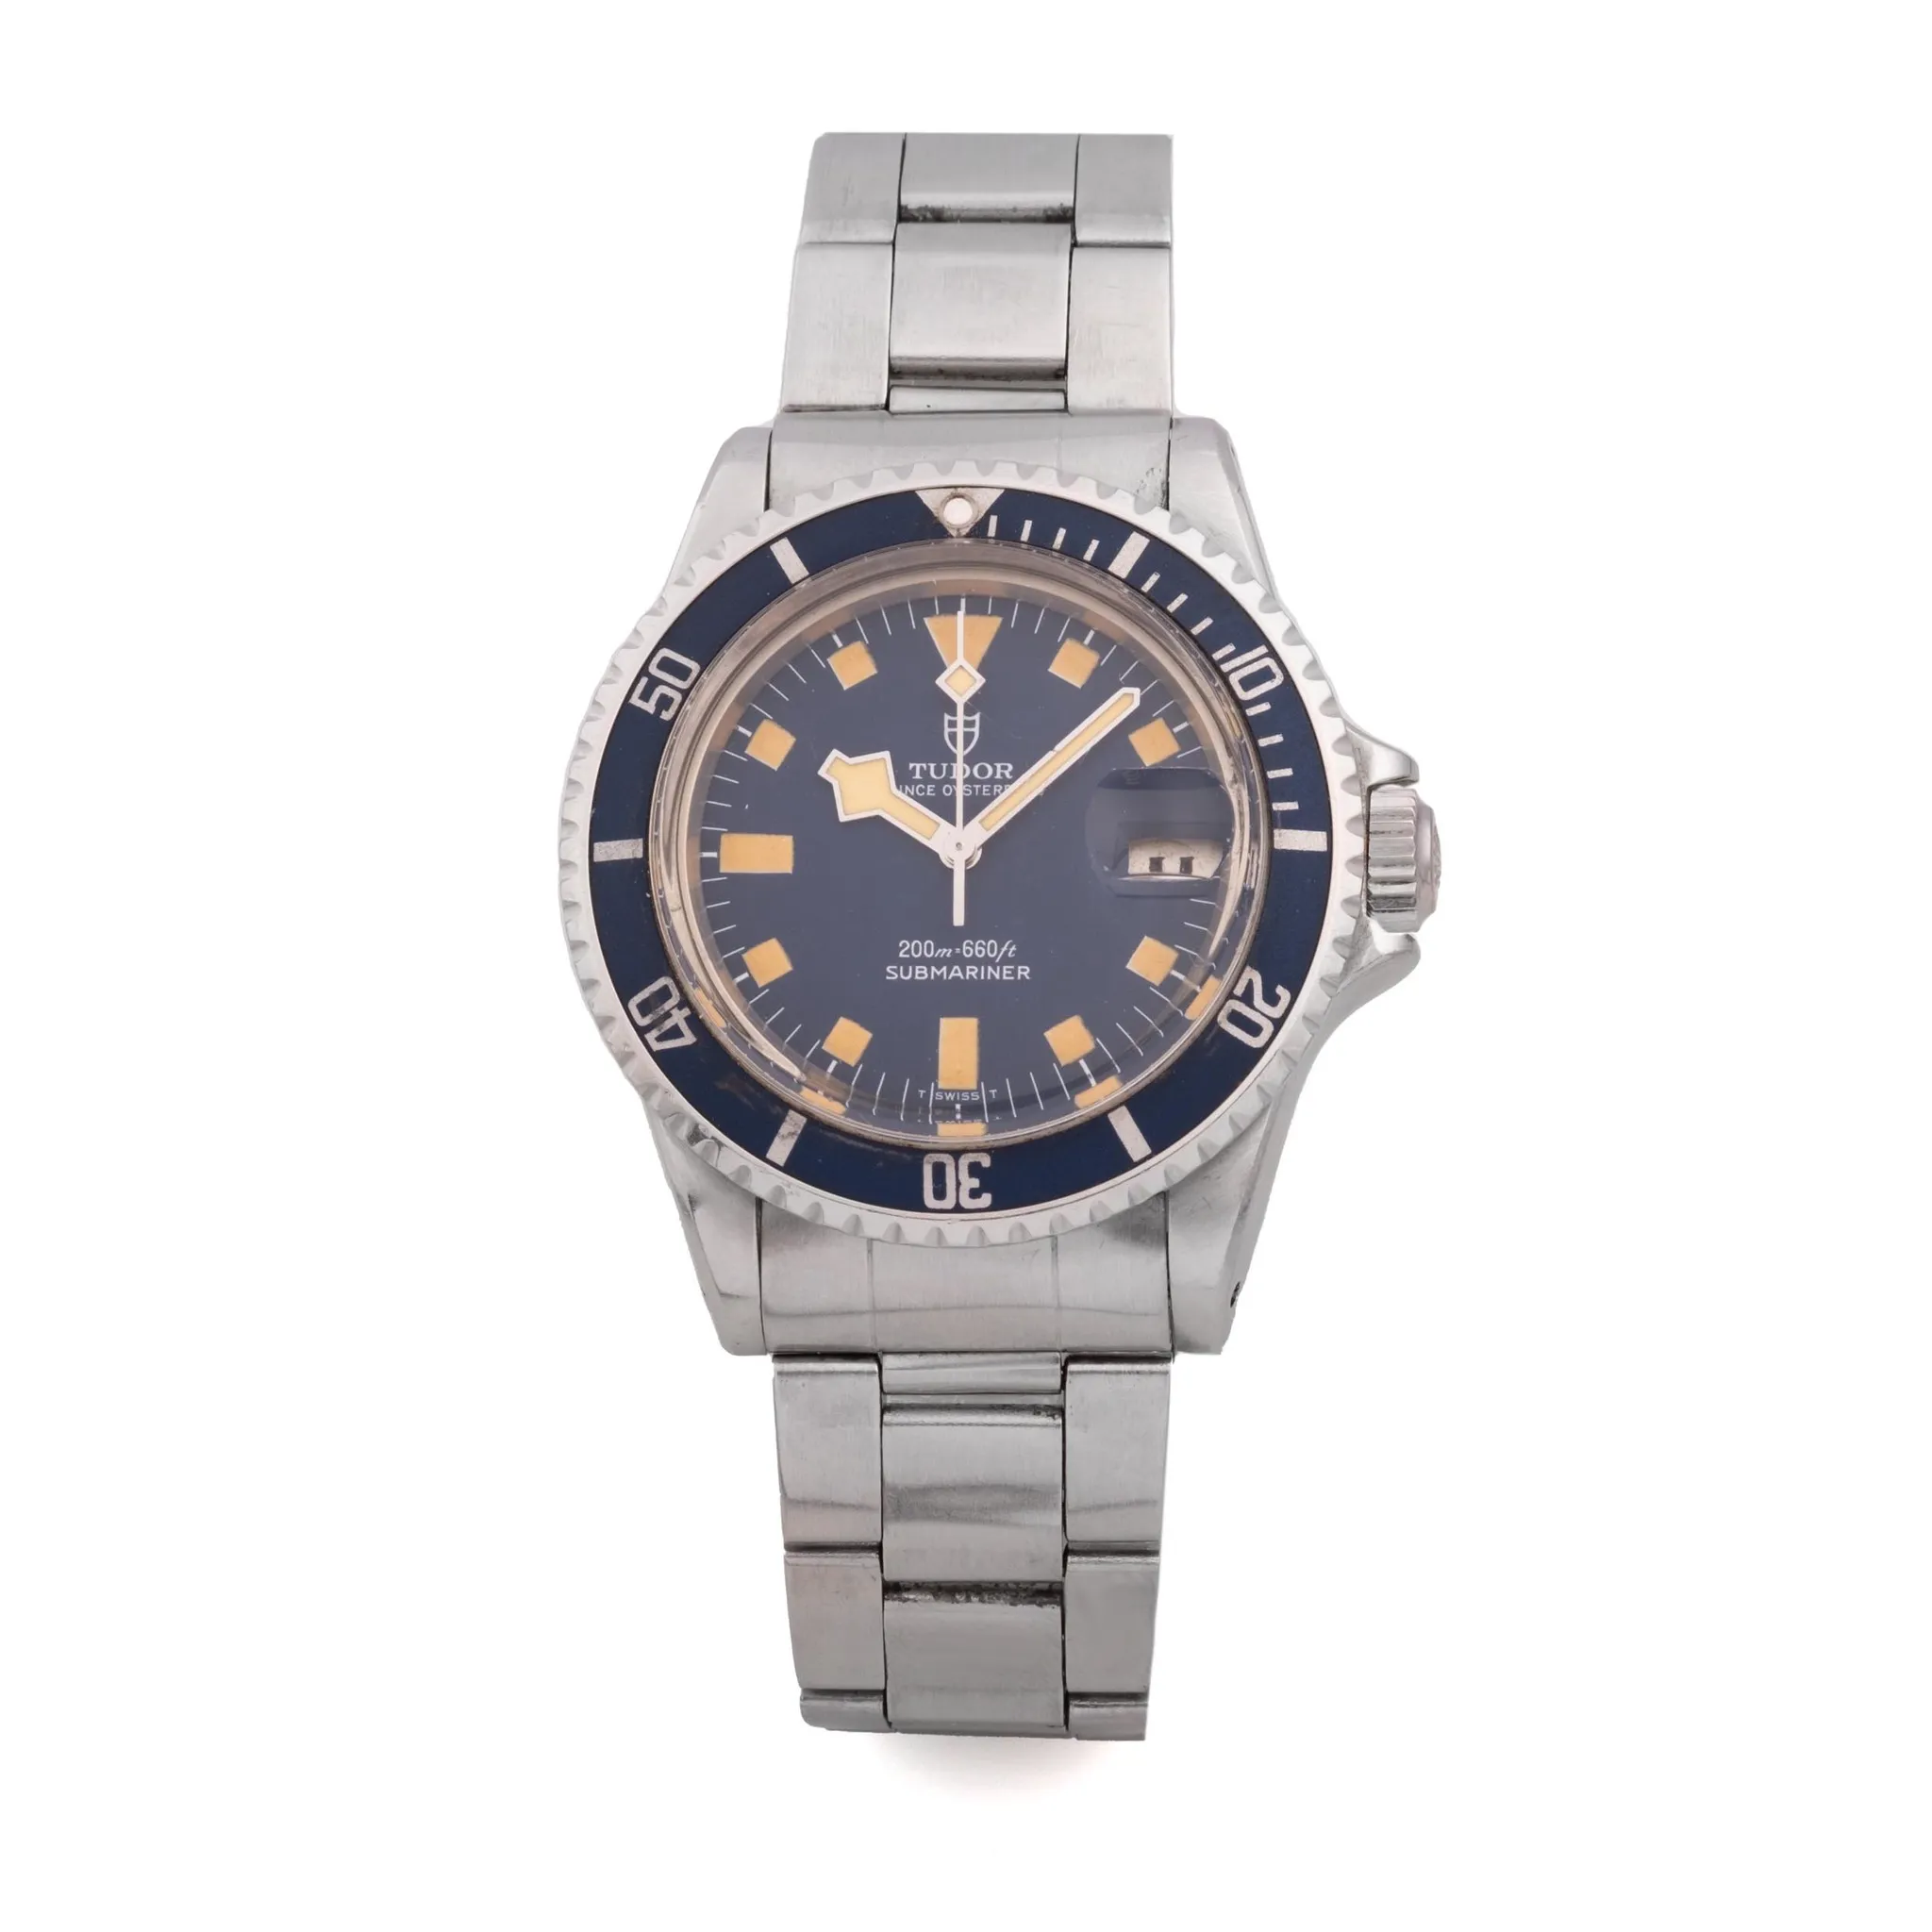 Tudor Prince Oysterdate Submariner 9411/0 40mm Stainless steel Blue